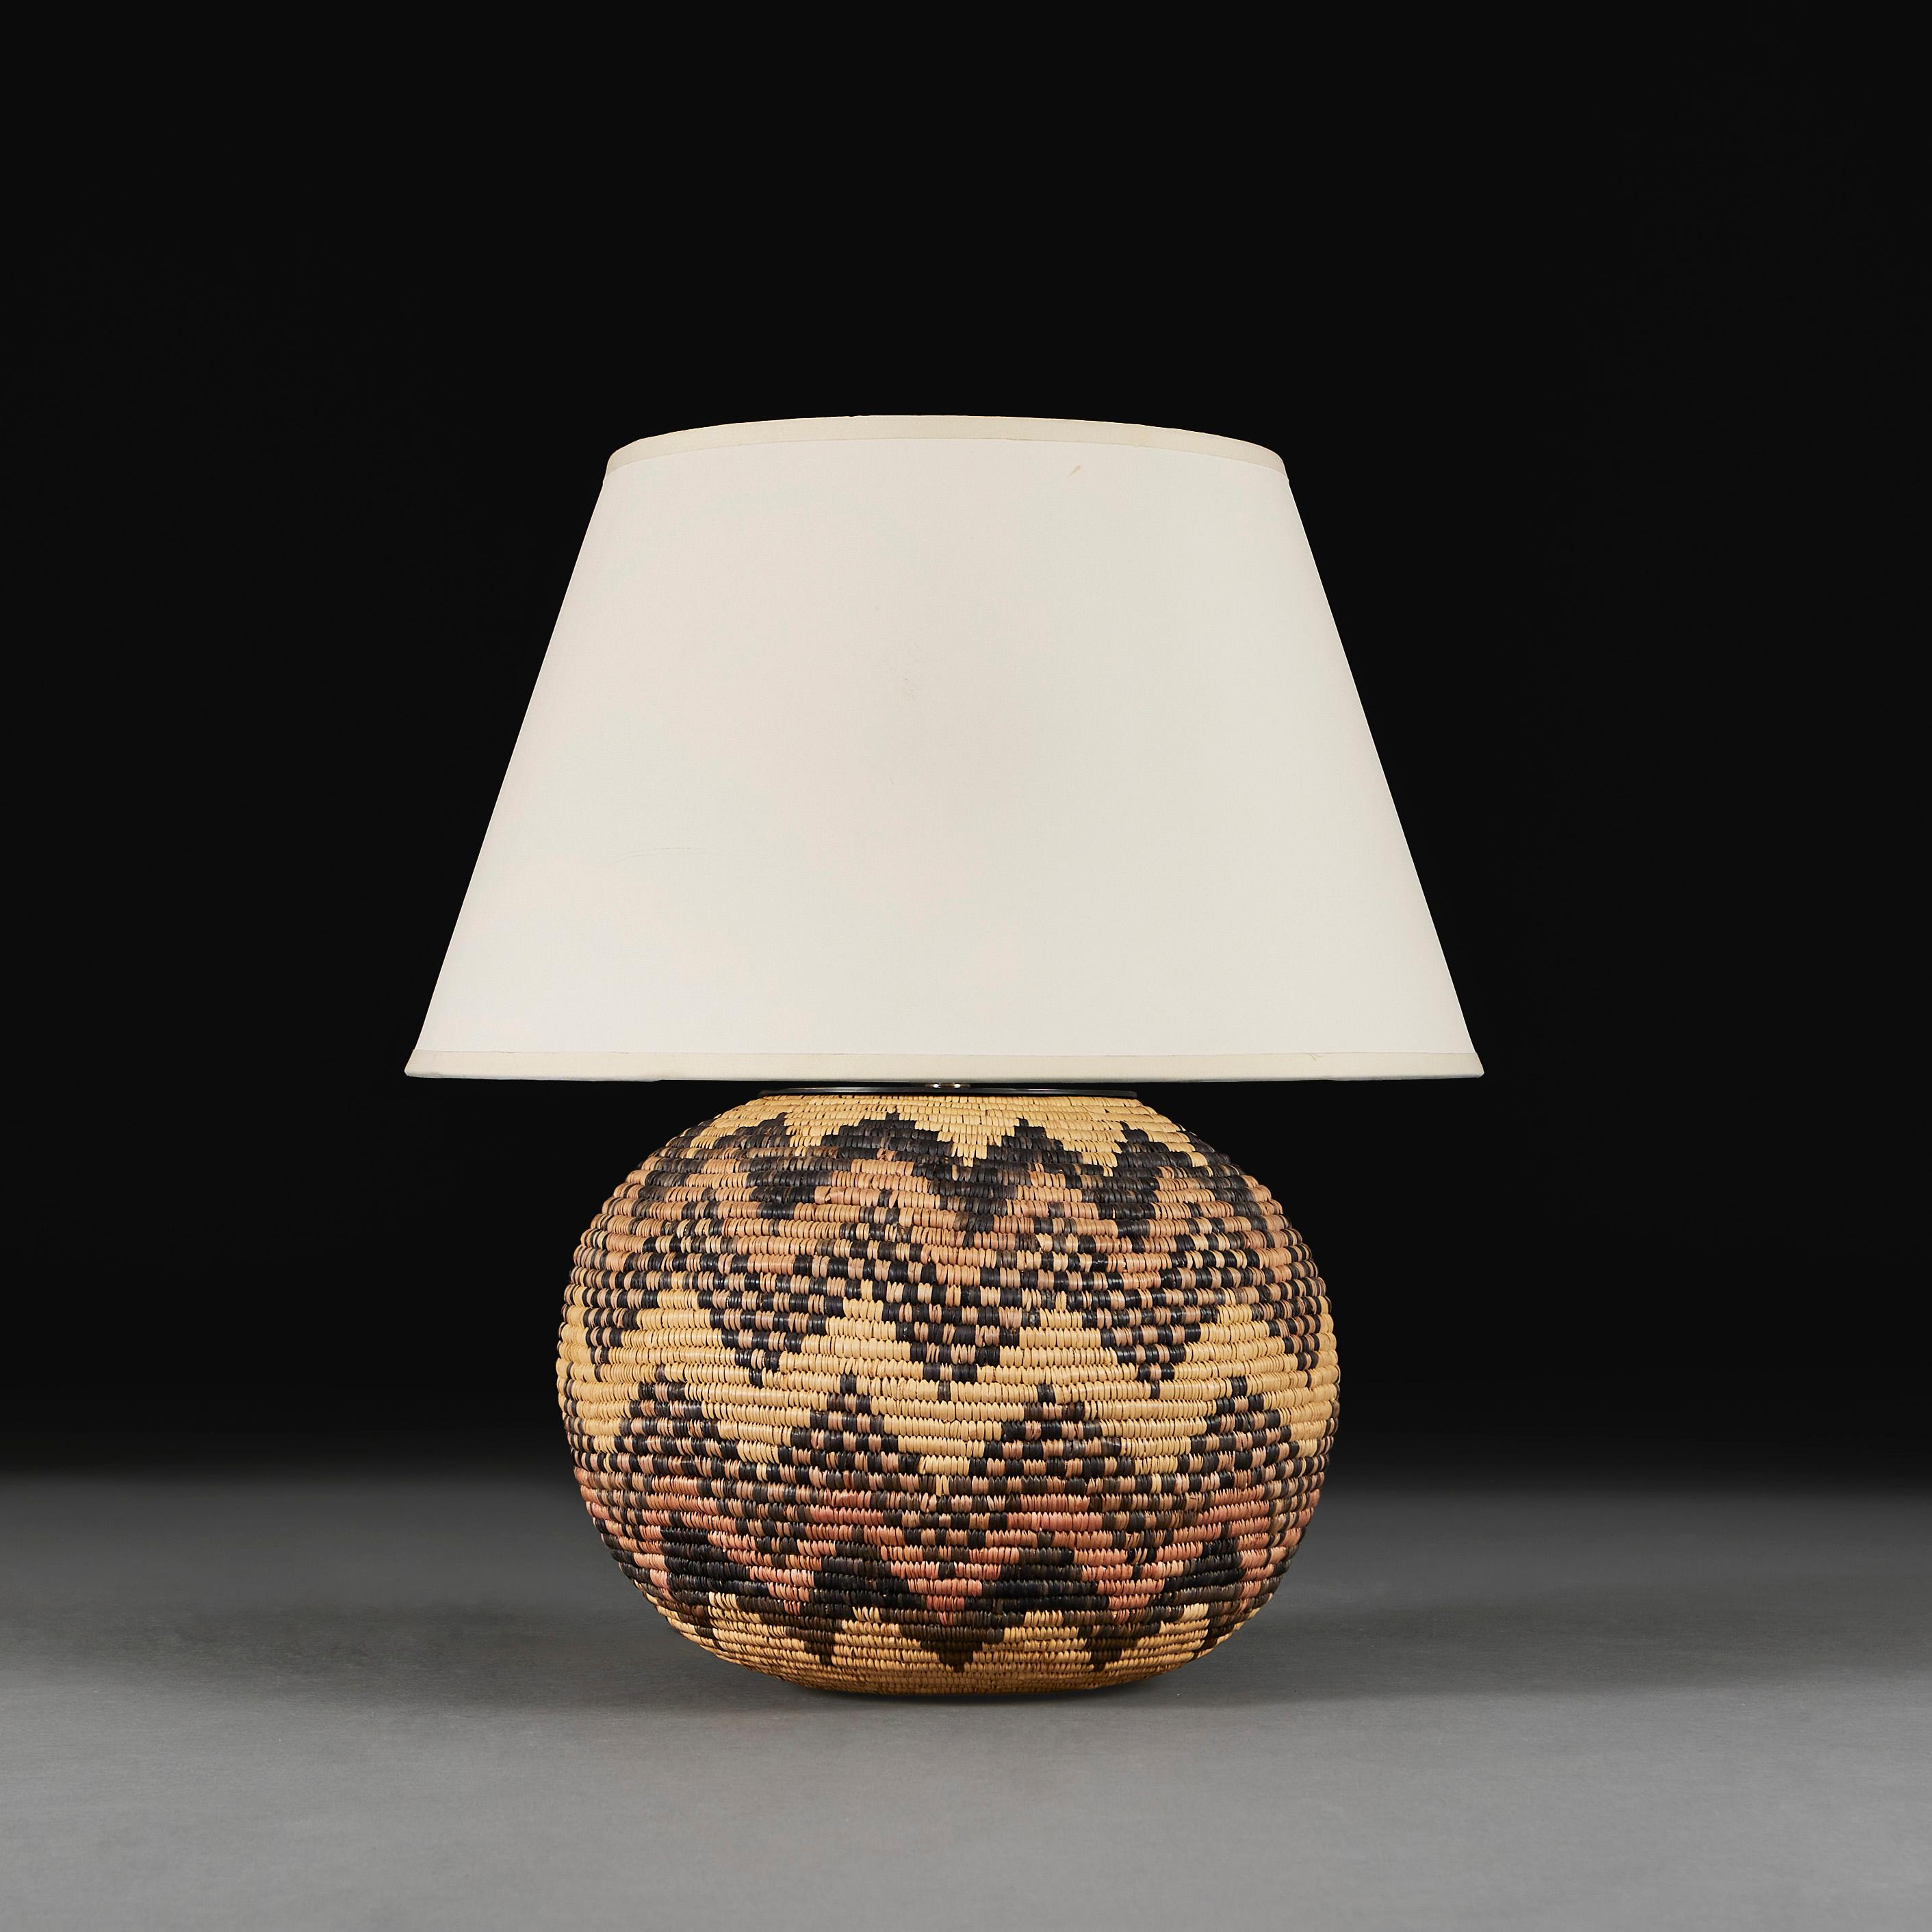 South African A Zigzag Basket Weave Lamp